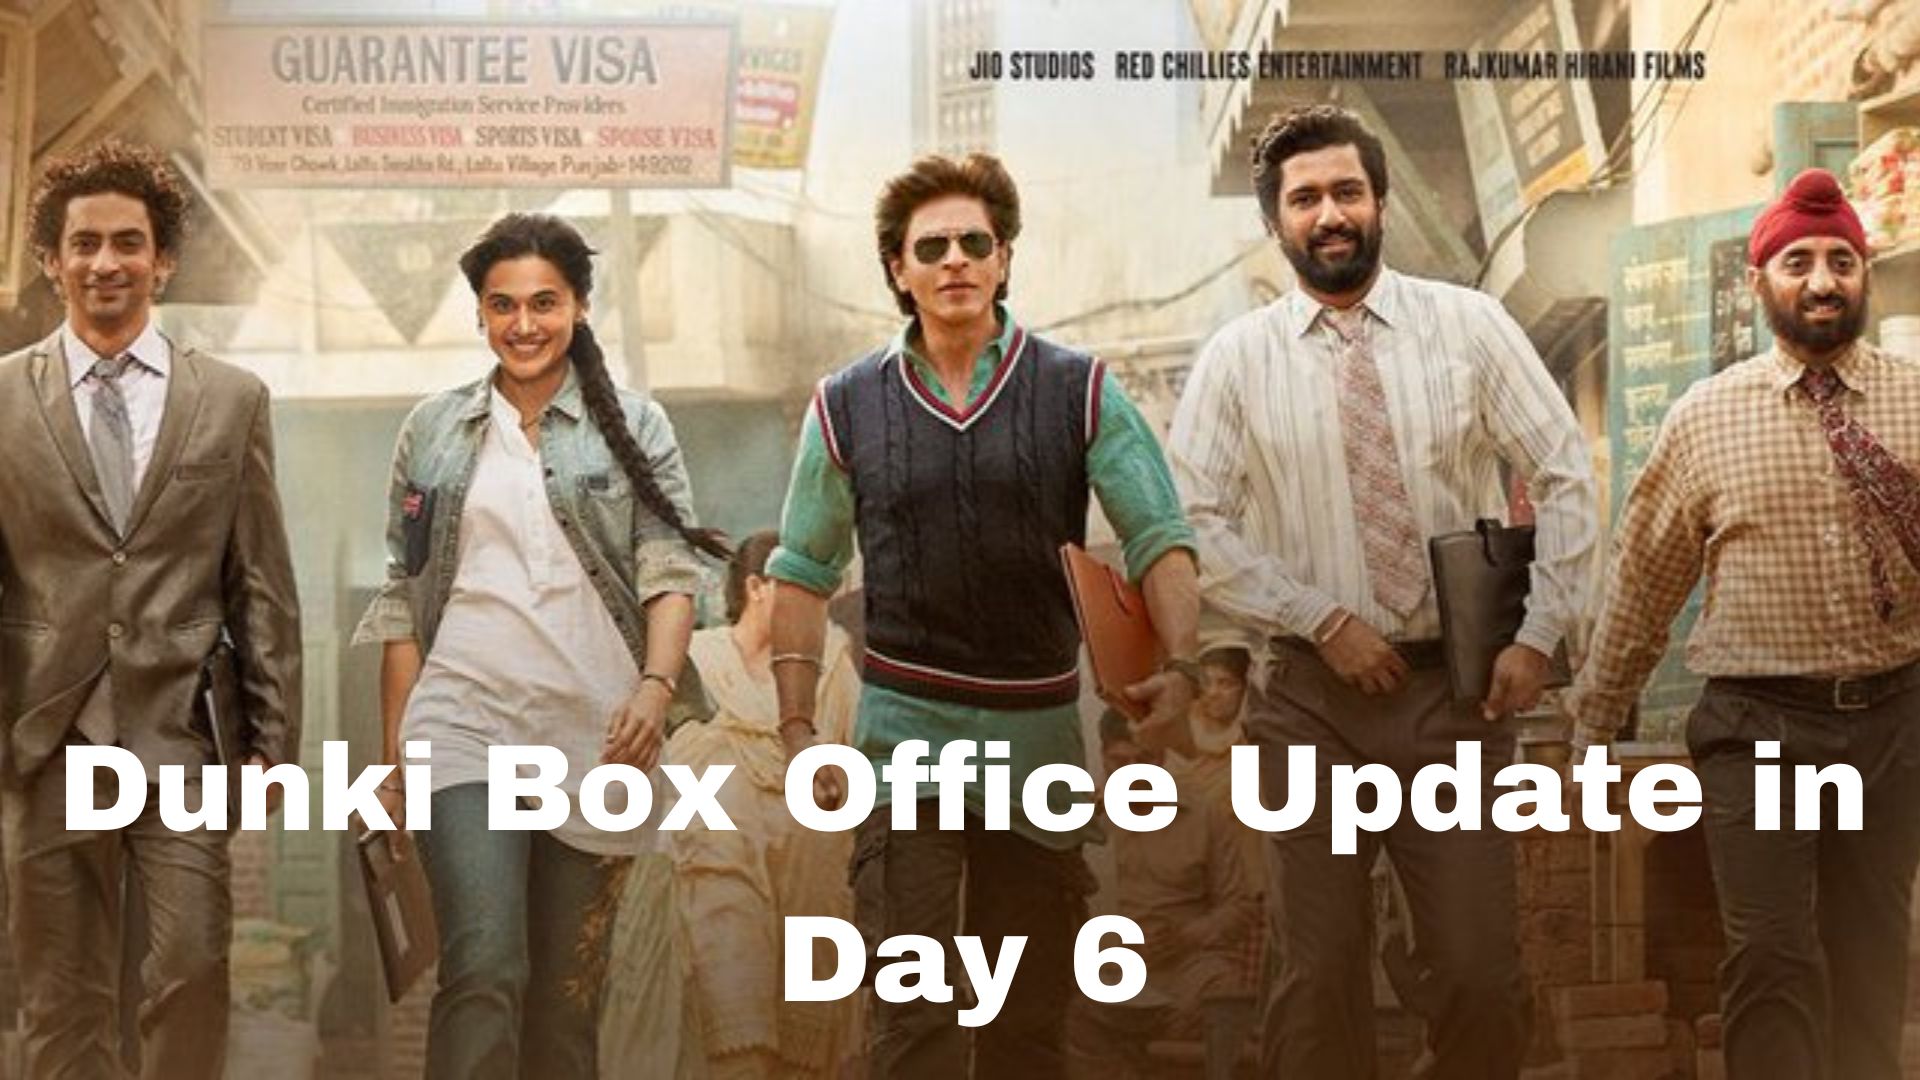 Dunki Box Office Update in Day 6: Shah Rukh Khan and Rajkumar Hirani deliver a drama that will delight and thrill in equal measure.